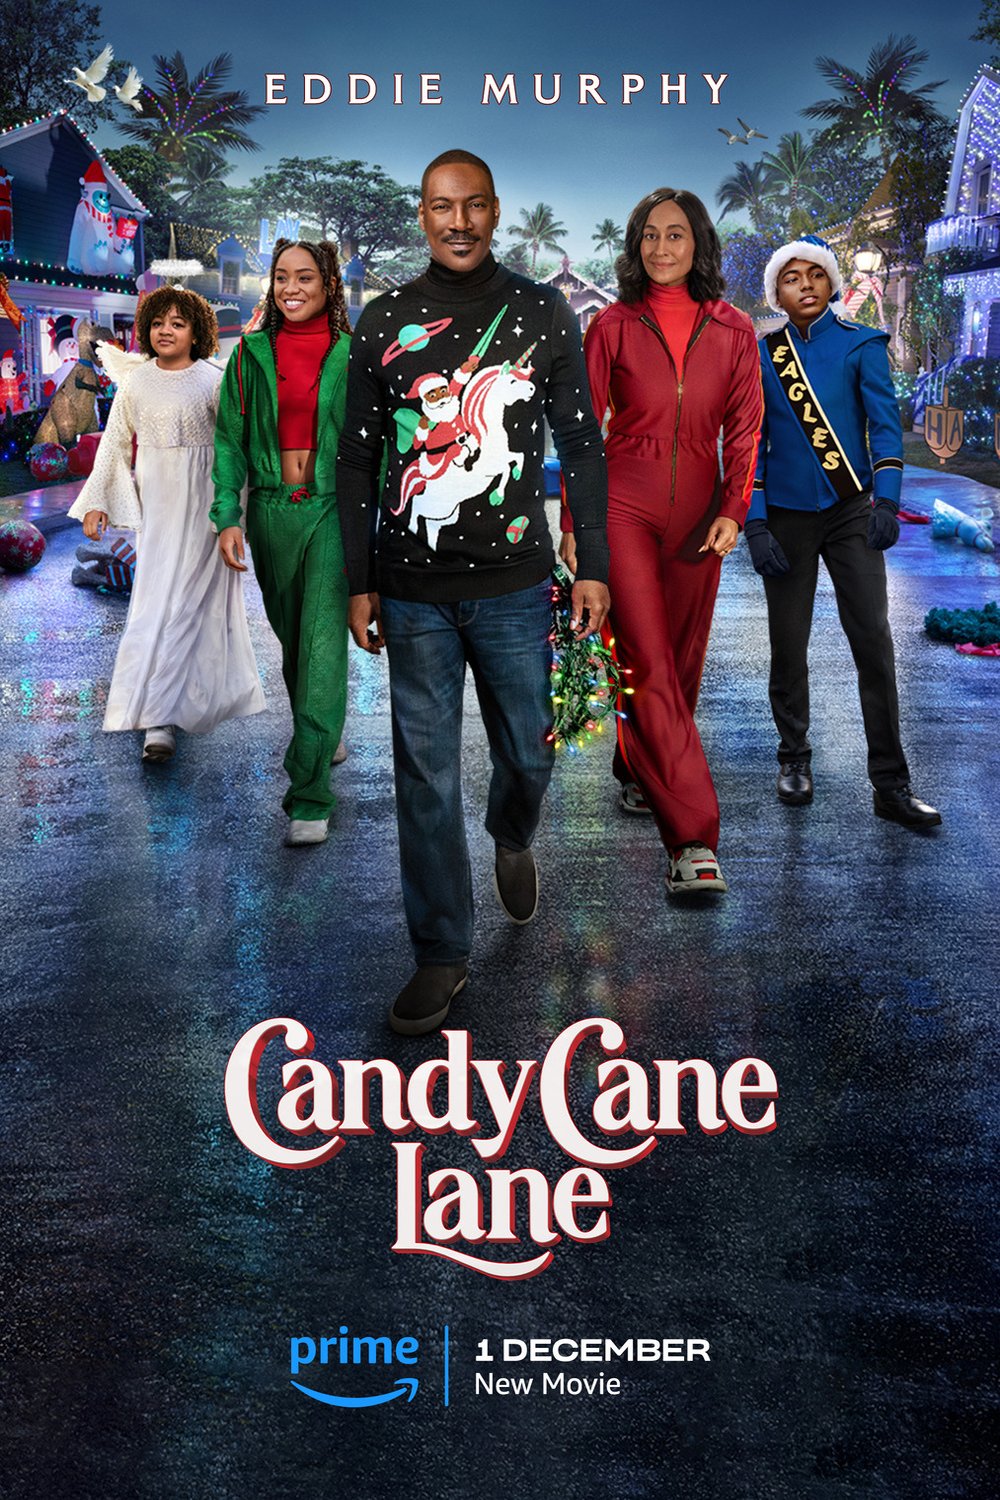 Poster of the movie Candy Cane Lane